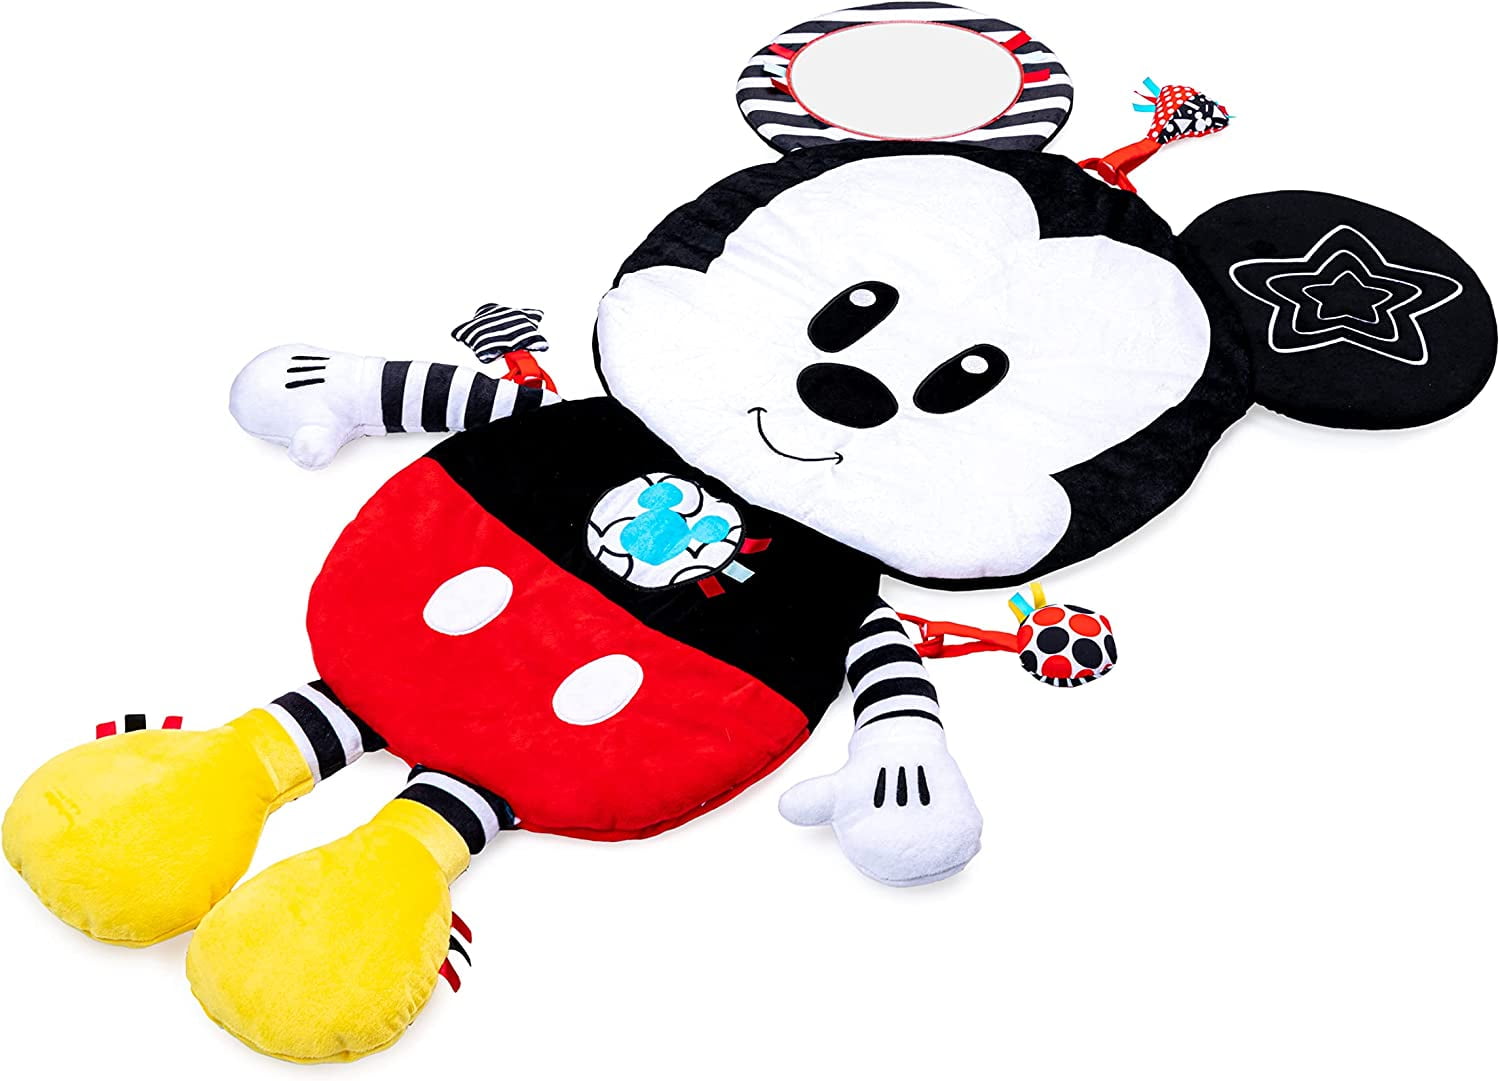 KIDS PREFERRED Disney Baby Mickey Mouse Black and White High